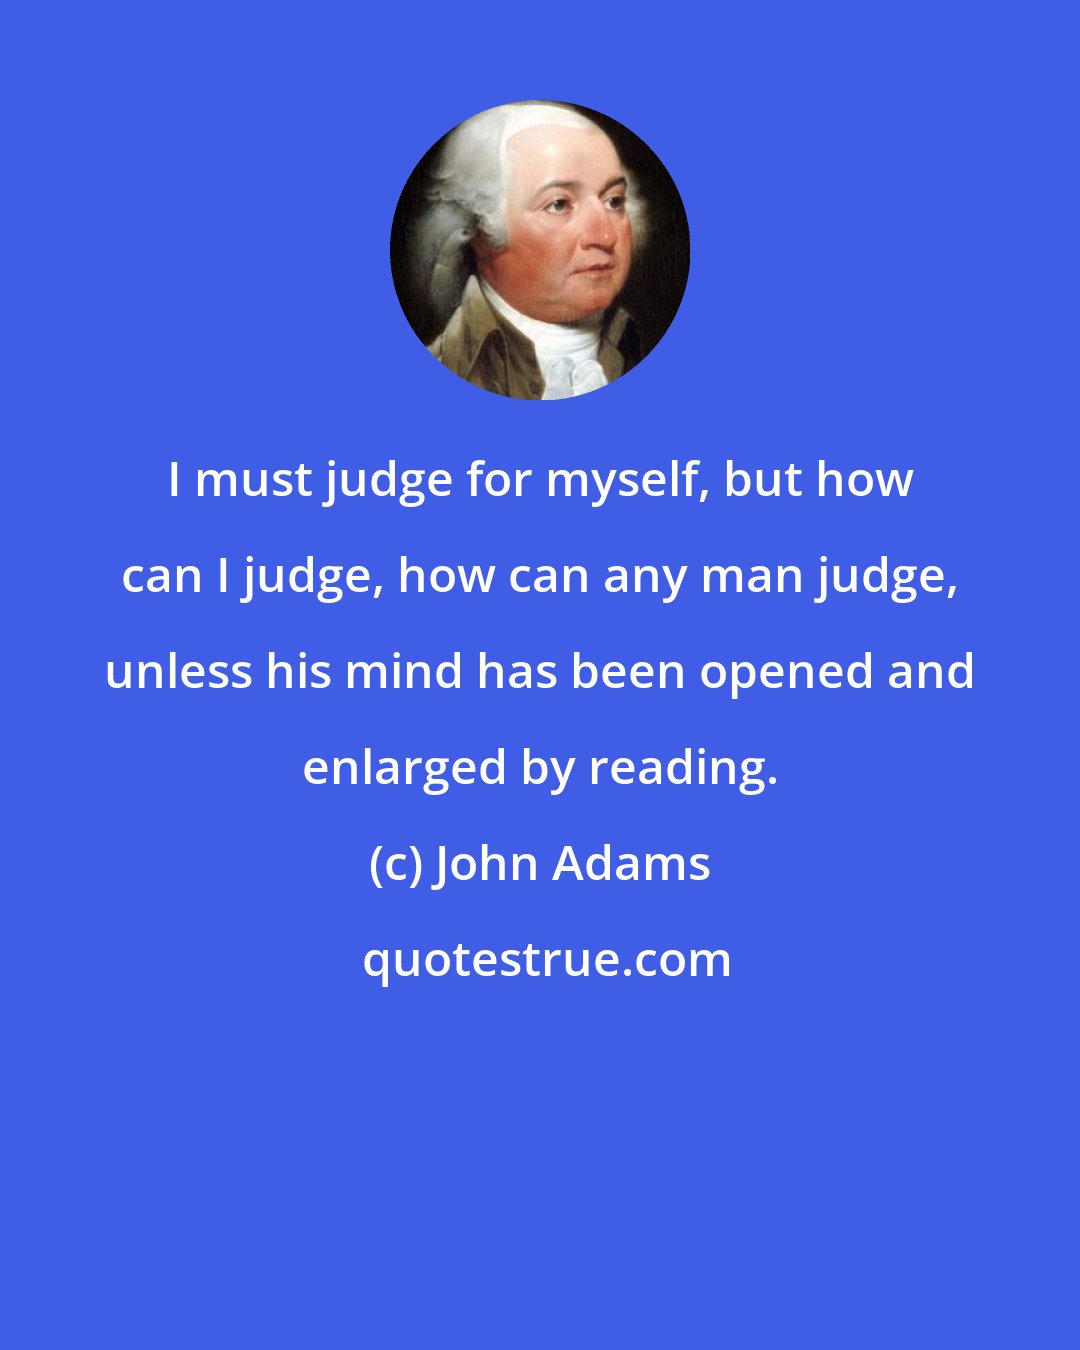 John Adams: I must judge for myself, but how can I judge, how can any man judge, unless his mind has been opened and enlarged by reading.